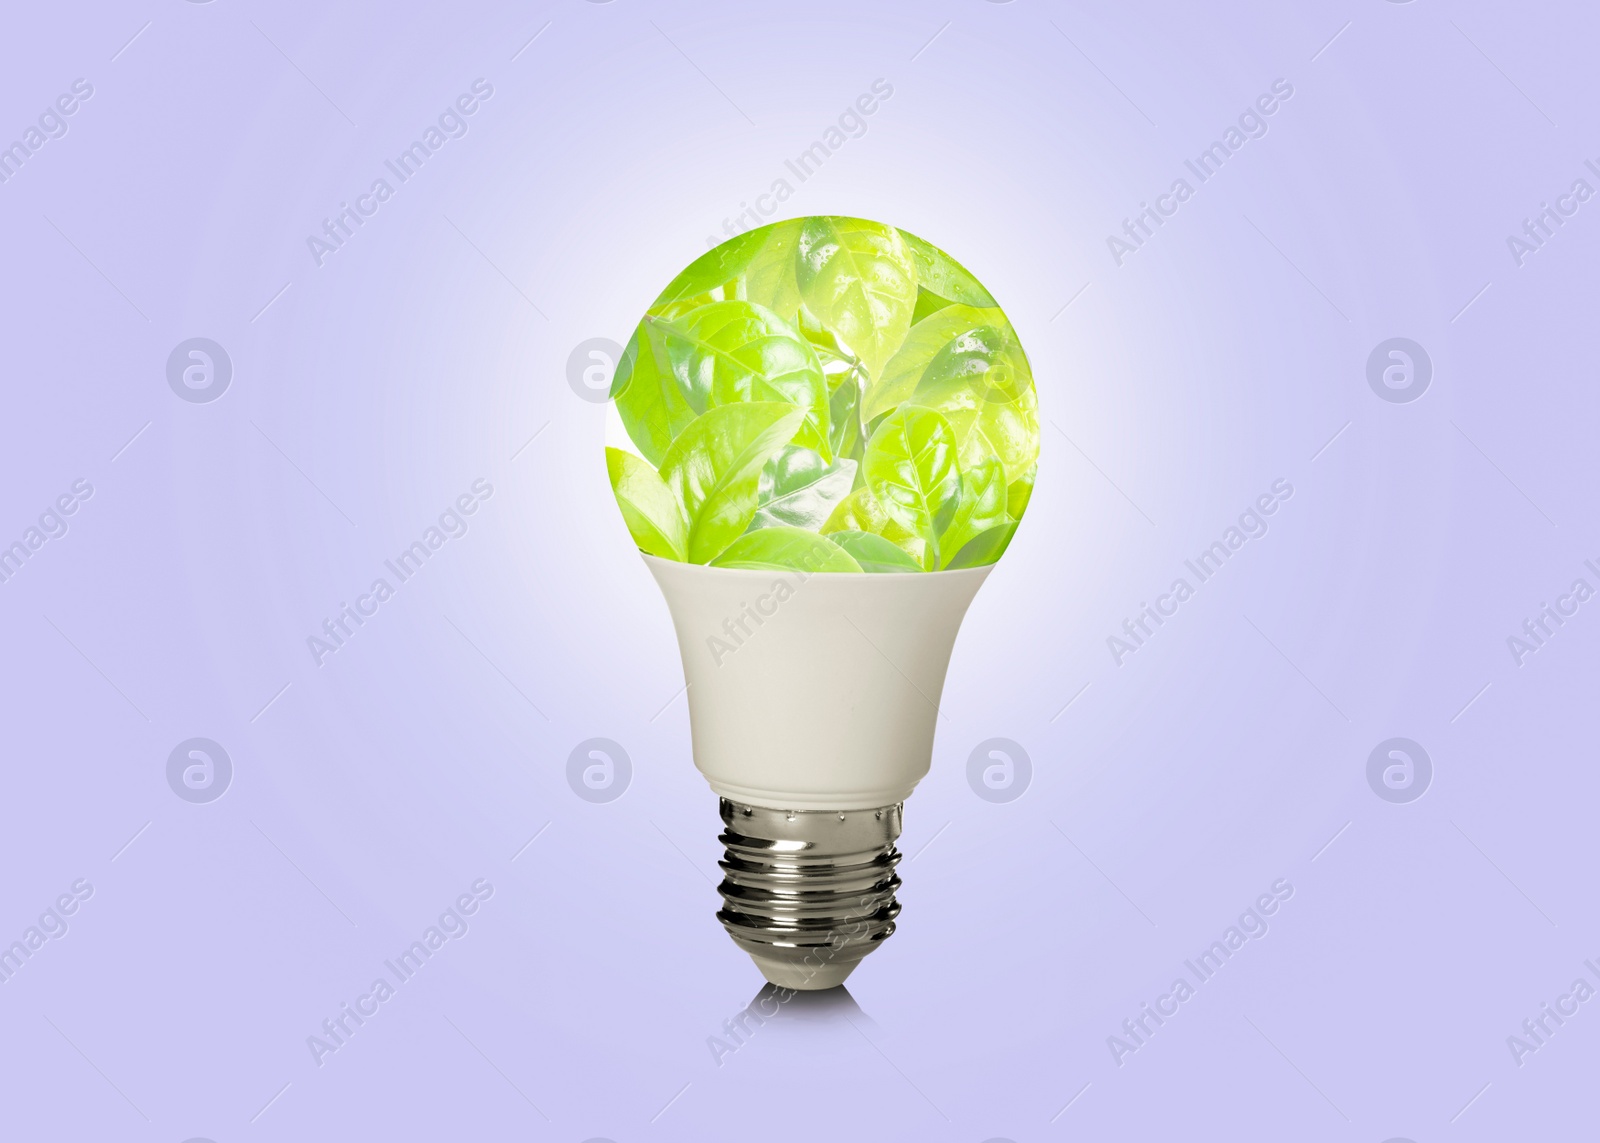 Image of Saving energy, eco-friendly lifestyle. Fresh green leaves inside of light bulb on lilac background